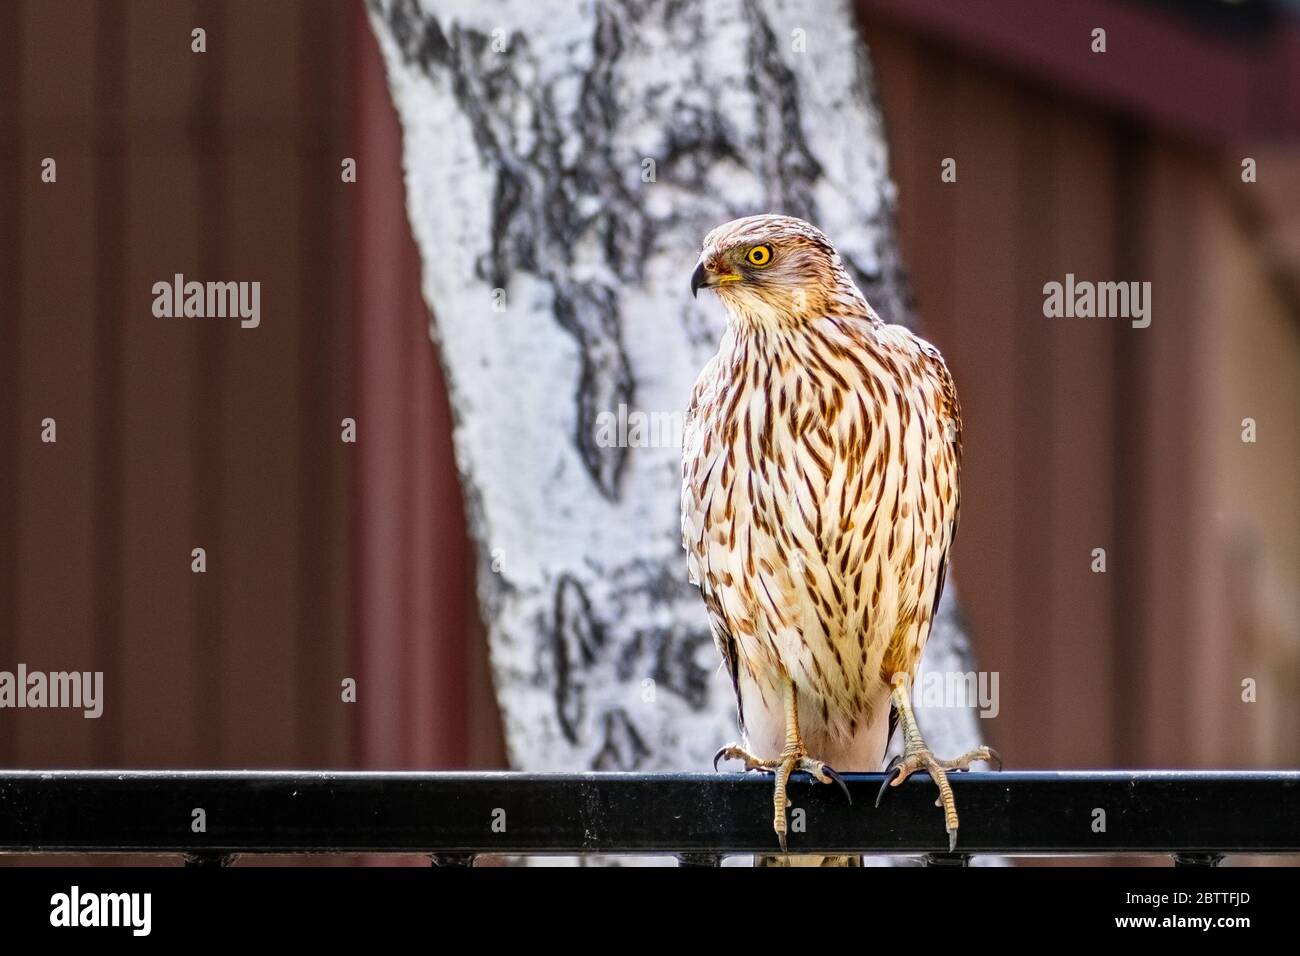 Close up of Cooper's Hawk (Accipiter cooperii) perched on a fence, birch tree and building wall visible in the background; San Francisco Bay Area, Cal Stock Photo